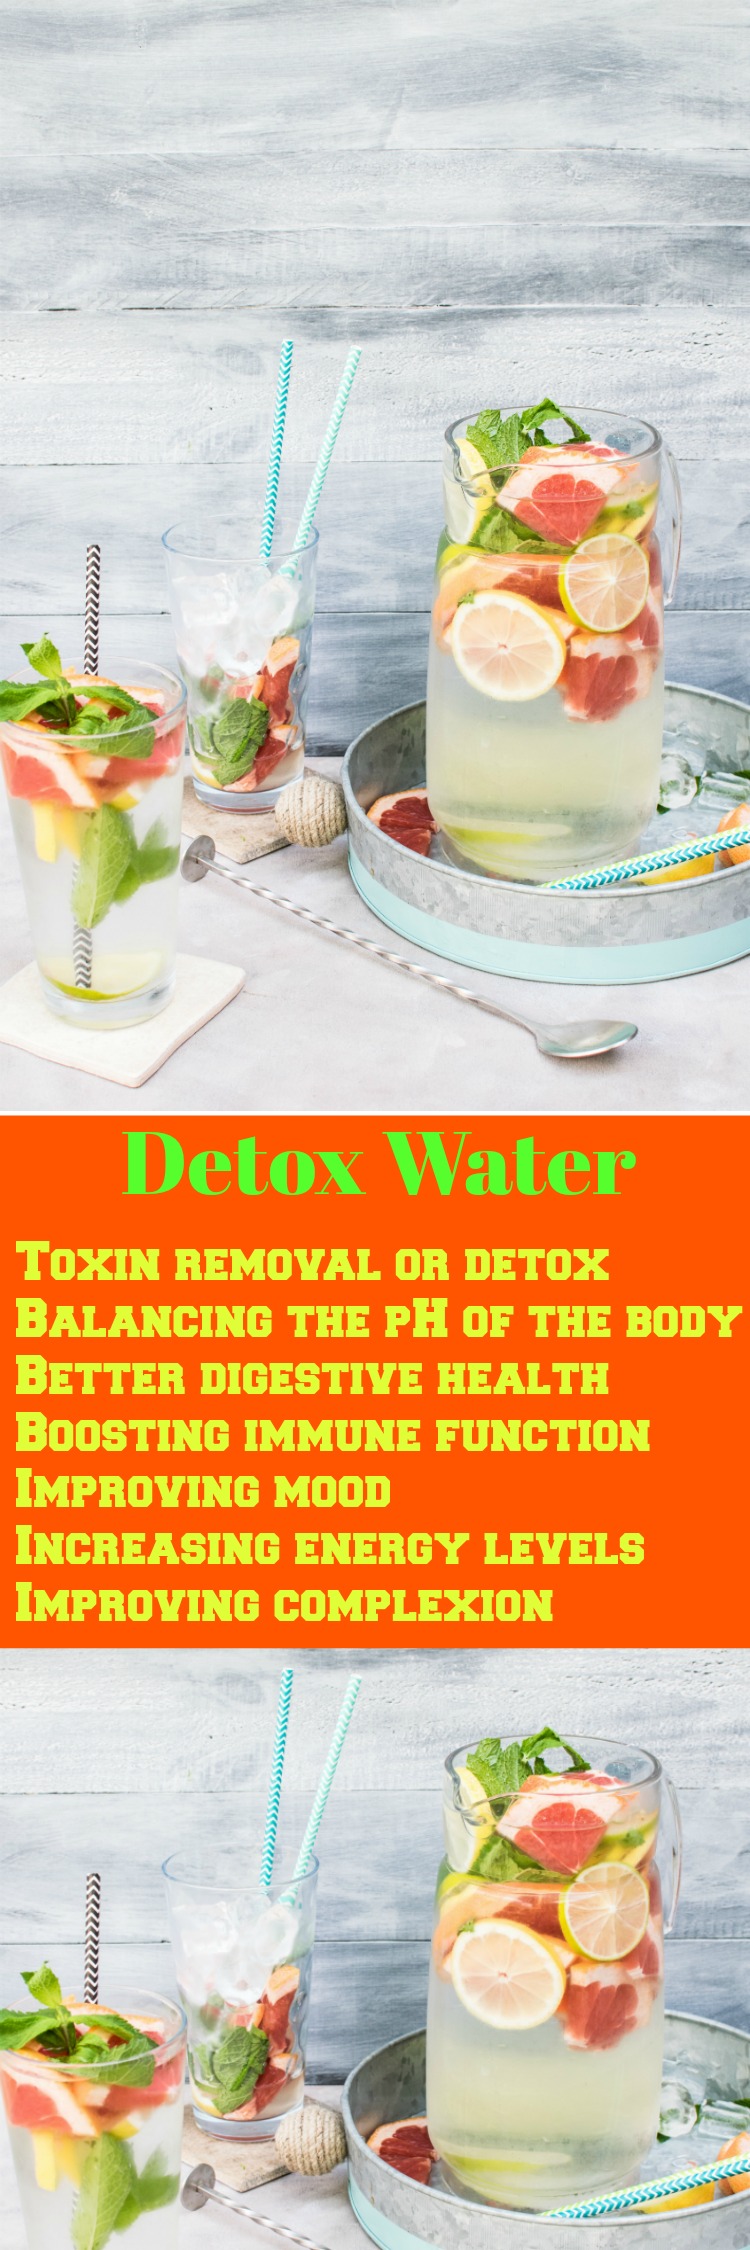 Weight Loss plateau? Try this Immune Boosting Detox Water that will help flush your system of unwanted toxins. Reduce belly bloat and hydrate you.